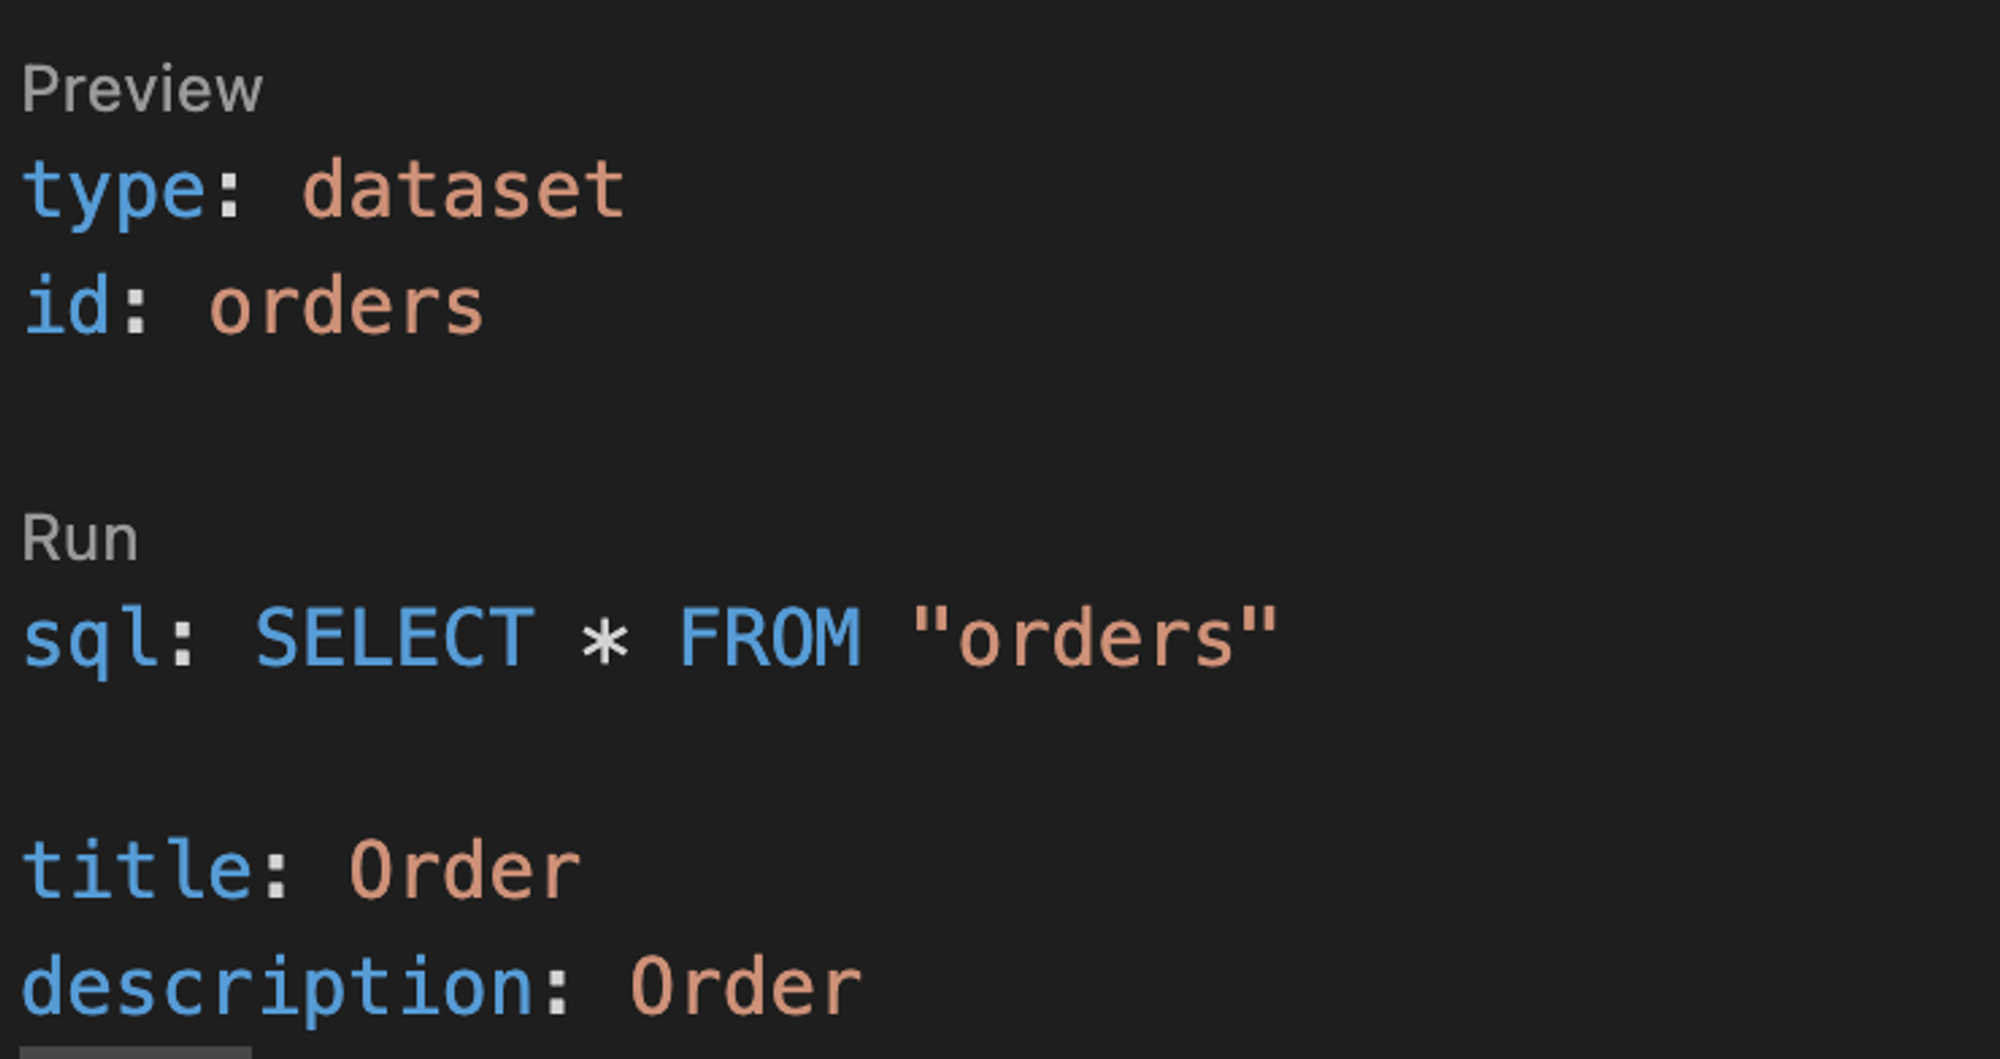 Notice the SQL statement seamlessly integrated into YAML. The statement even supports the SQL syntax highlighting.